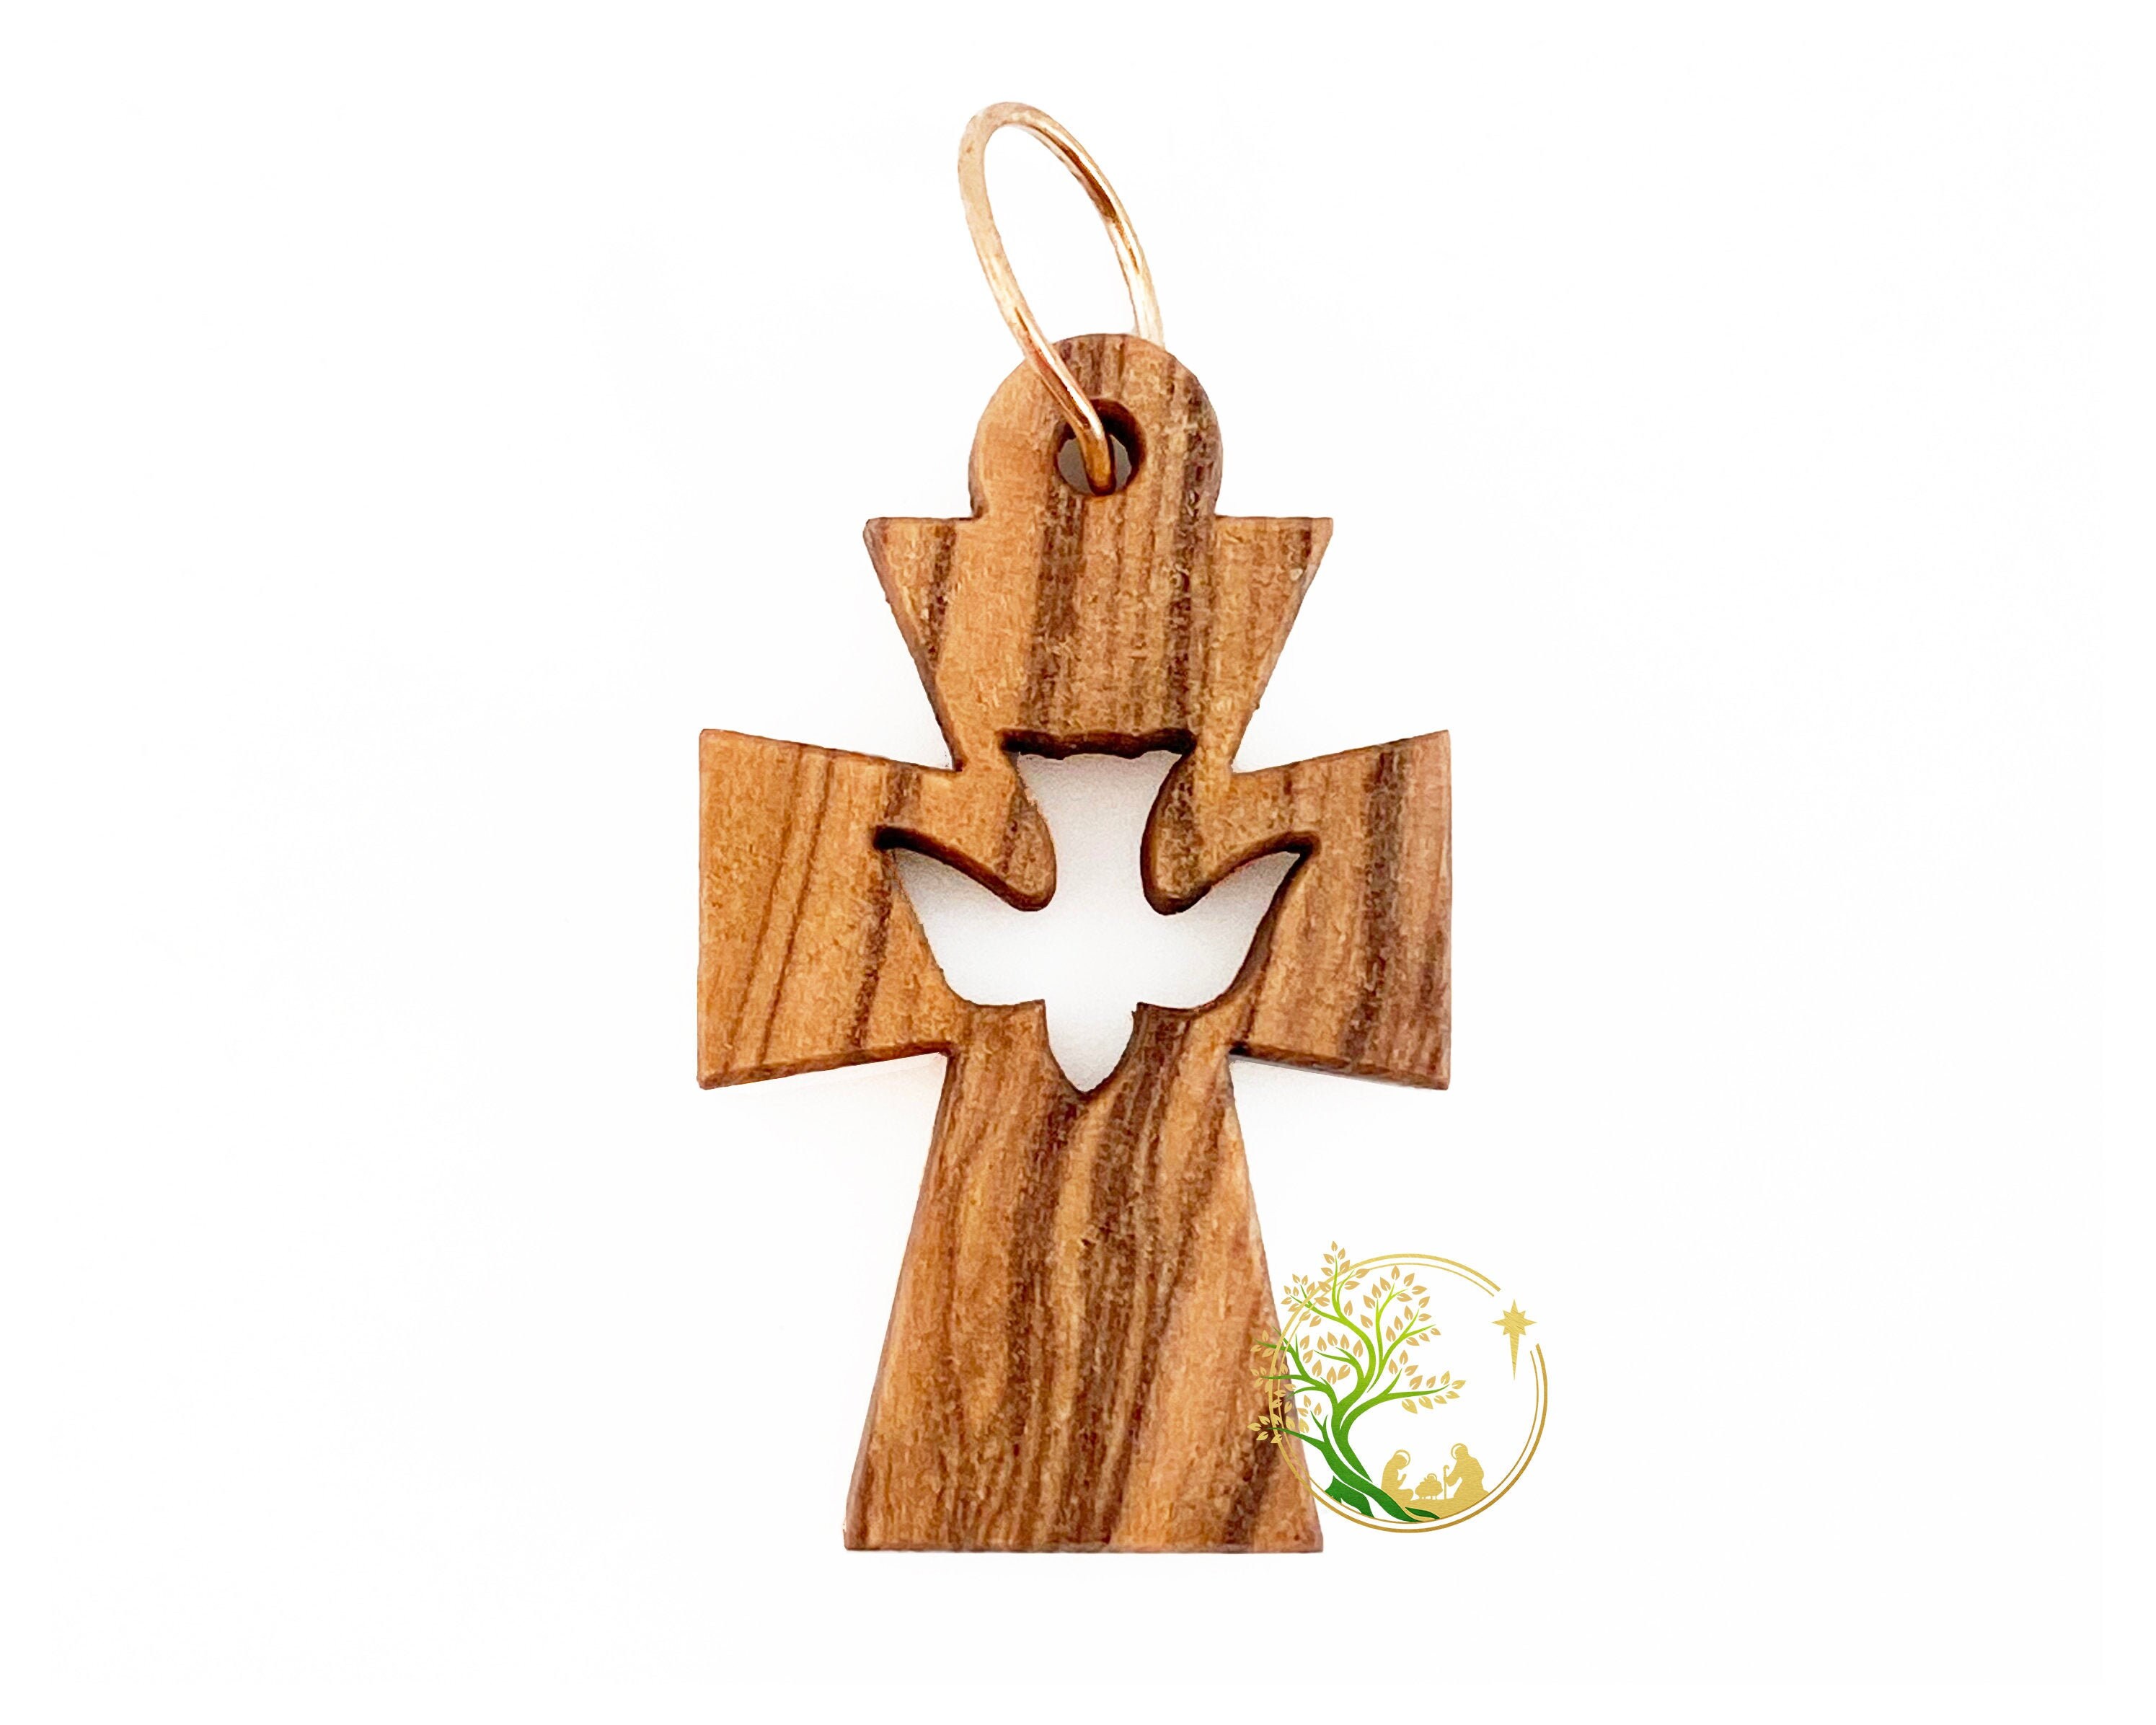 50 Wooden Cross for Craft,natural Wooden Cross Finding,small Wooden Cross  Pendant.large Cross Charm. 